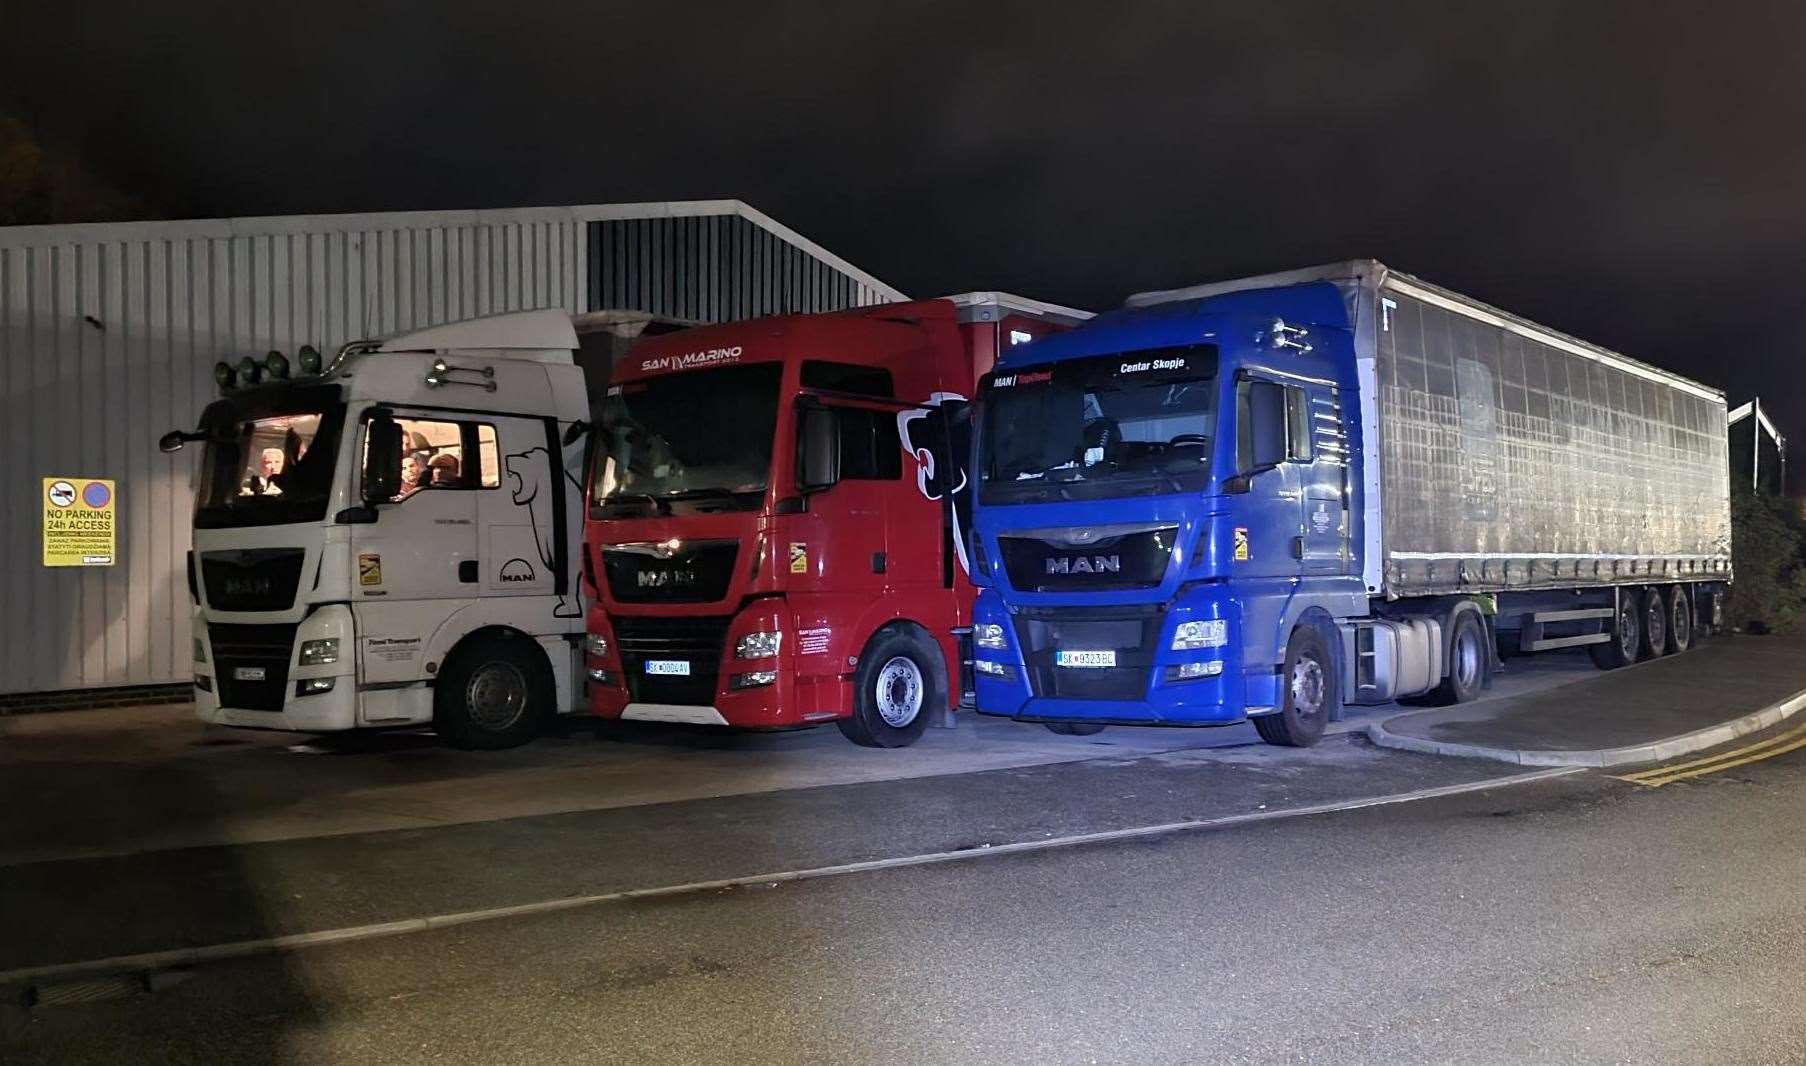 As many as 12 lorries a night have been spotted on the Henwood estate